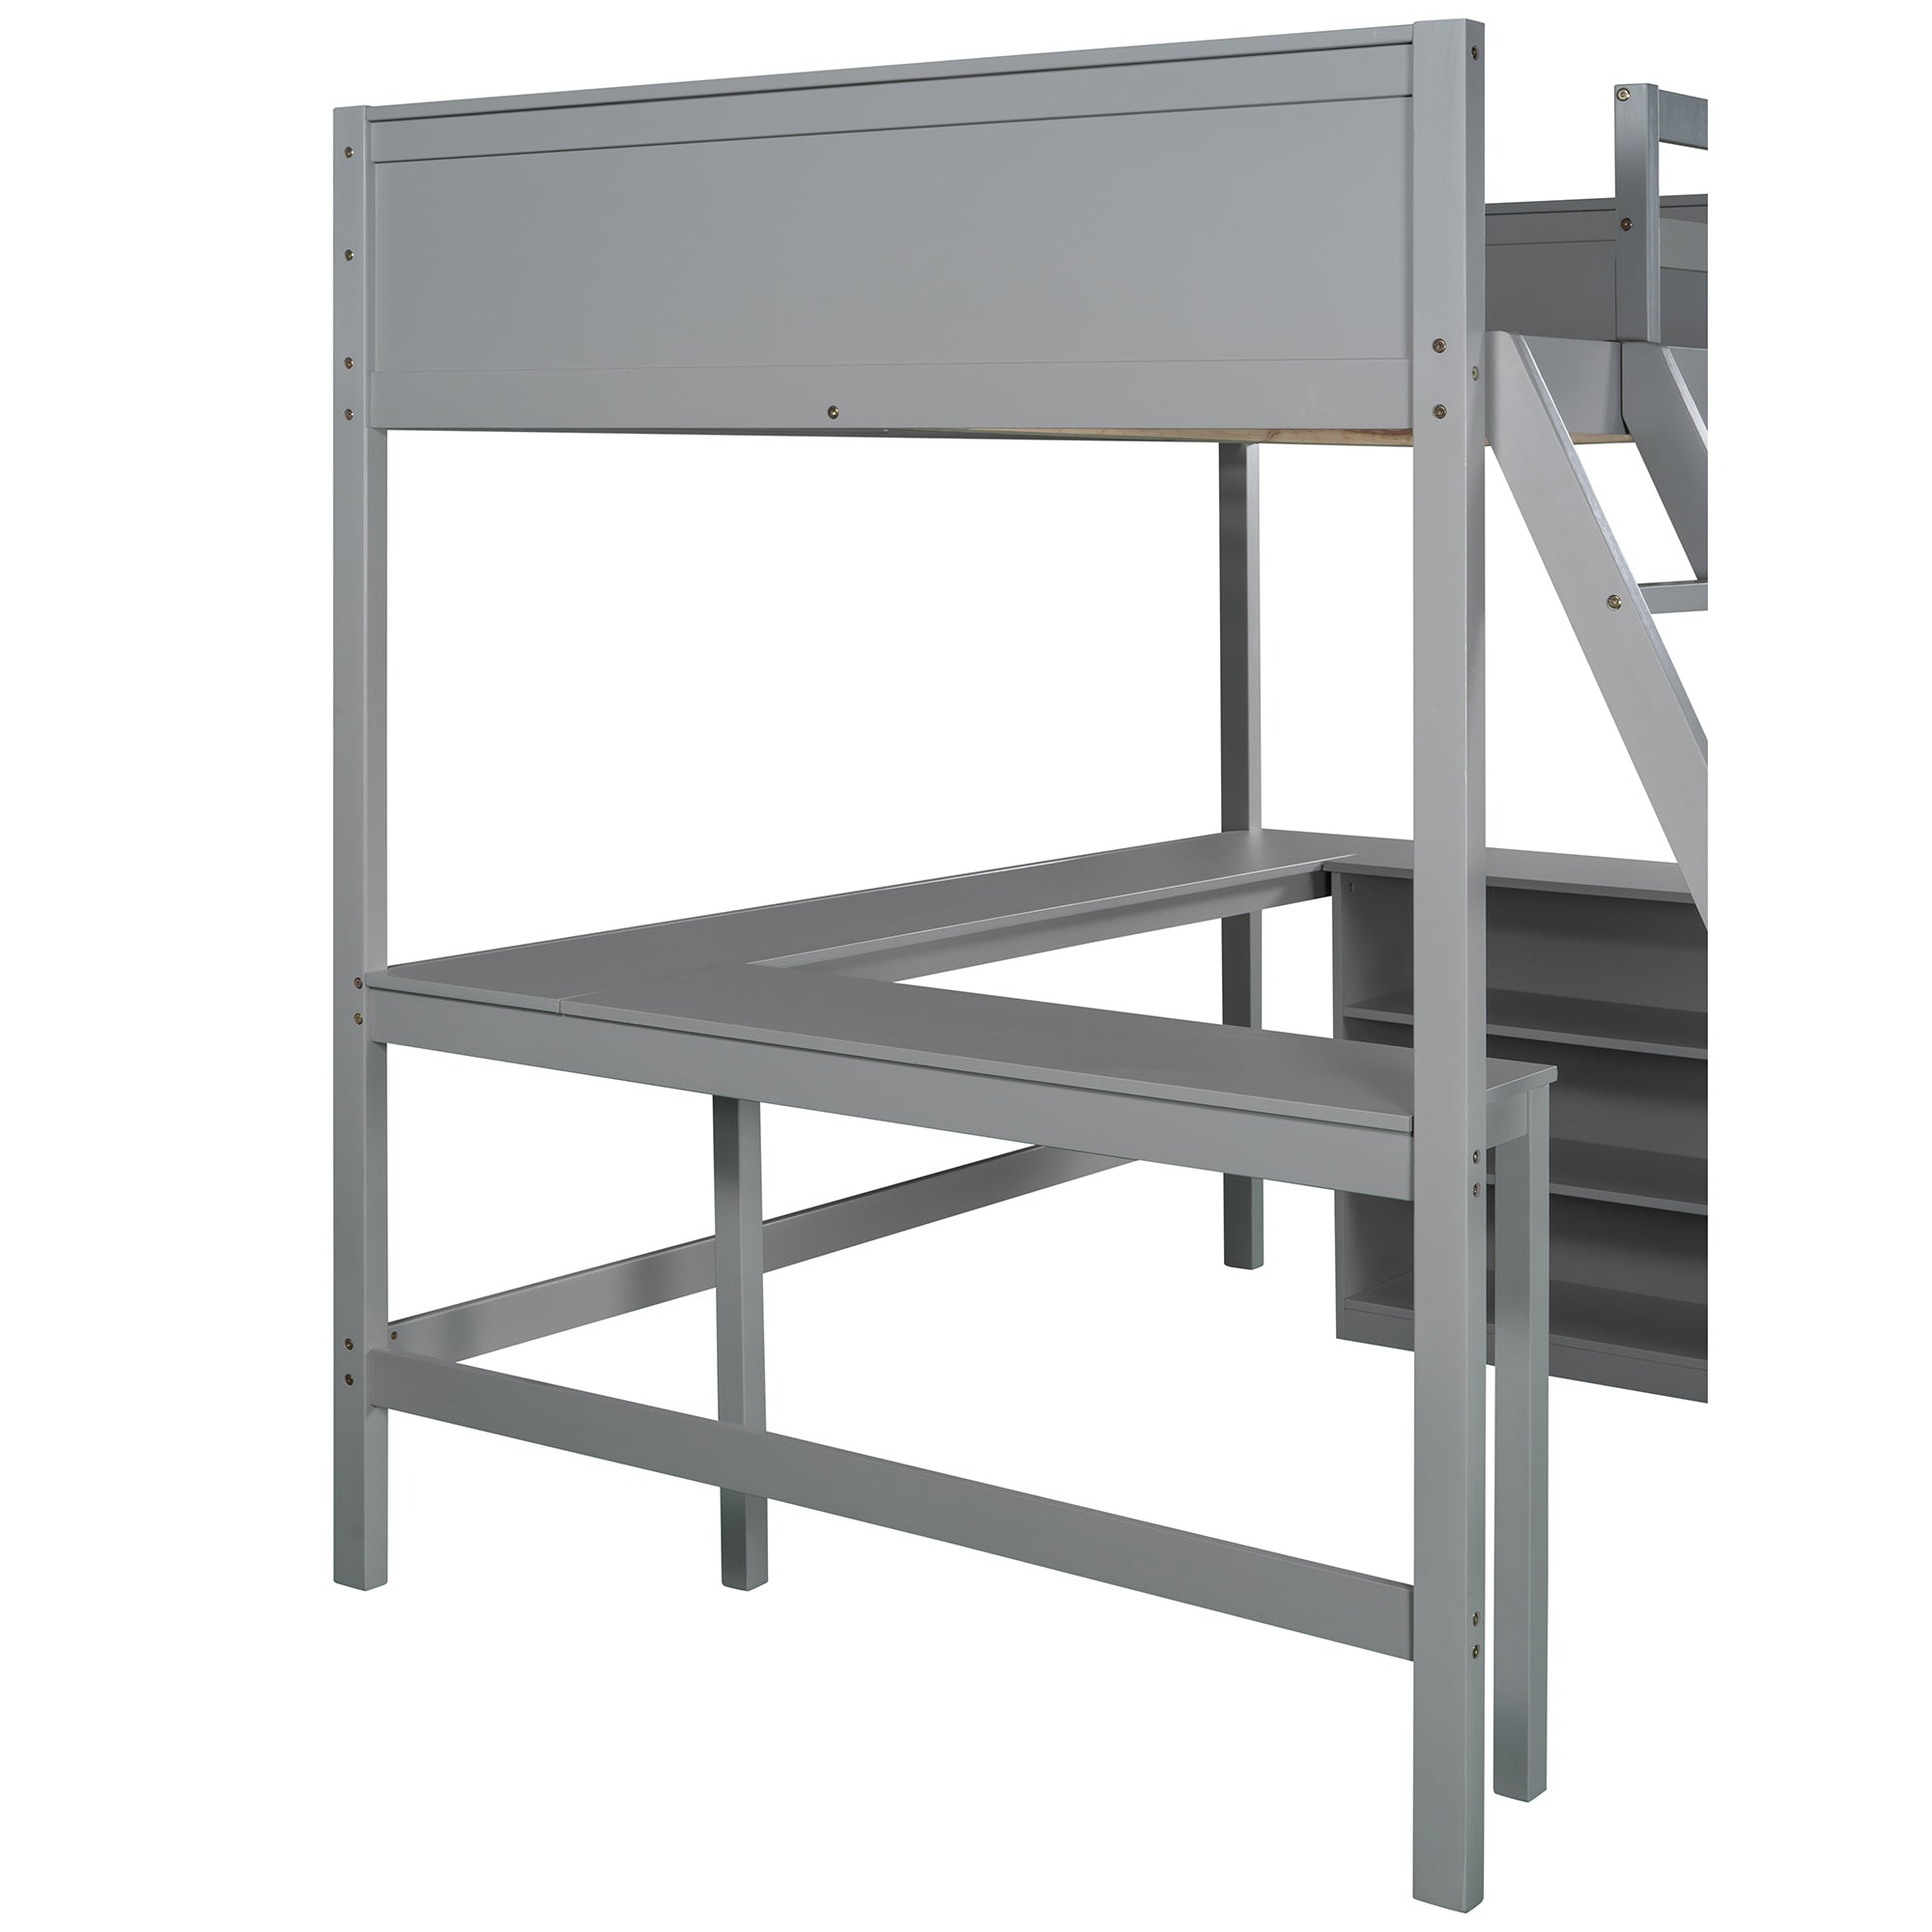 Full size Loft Bed with Shelves and Desk, Wooden Loft Bed with Desk (Gray)